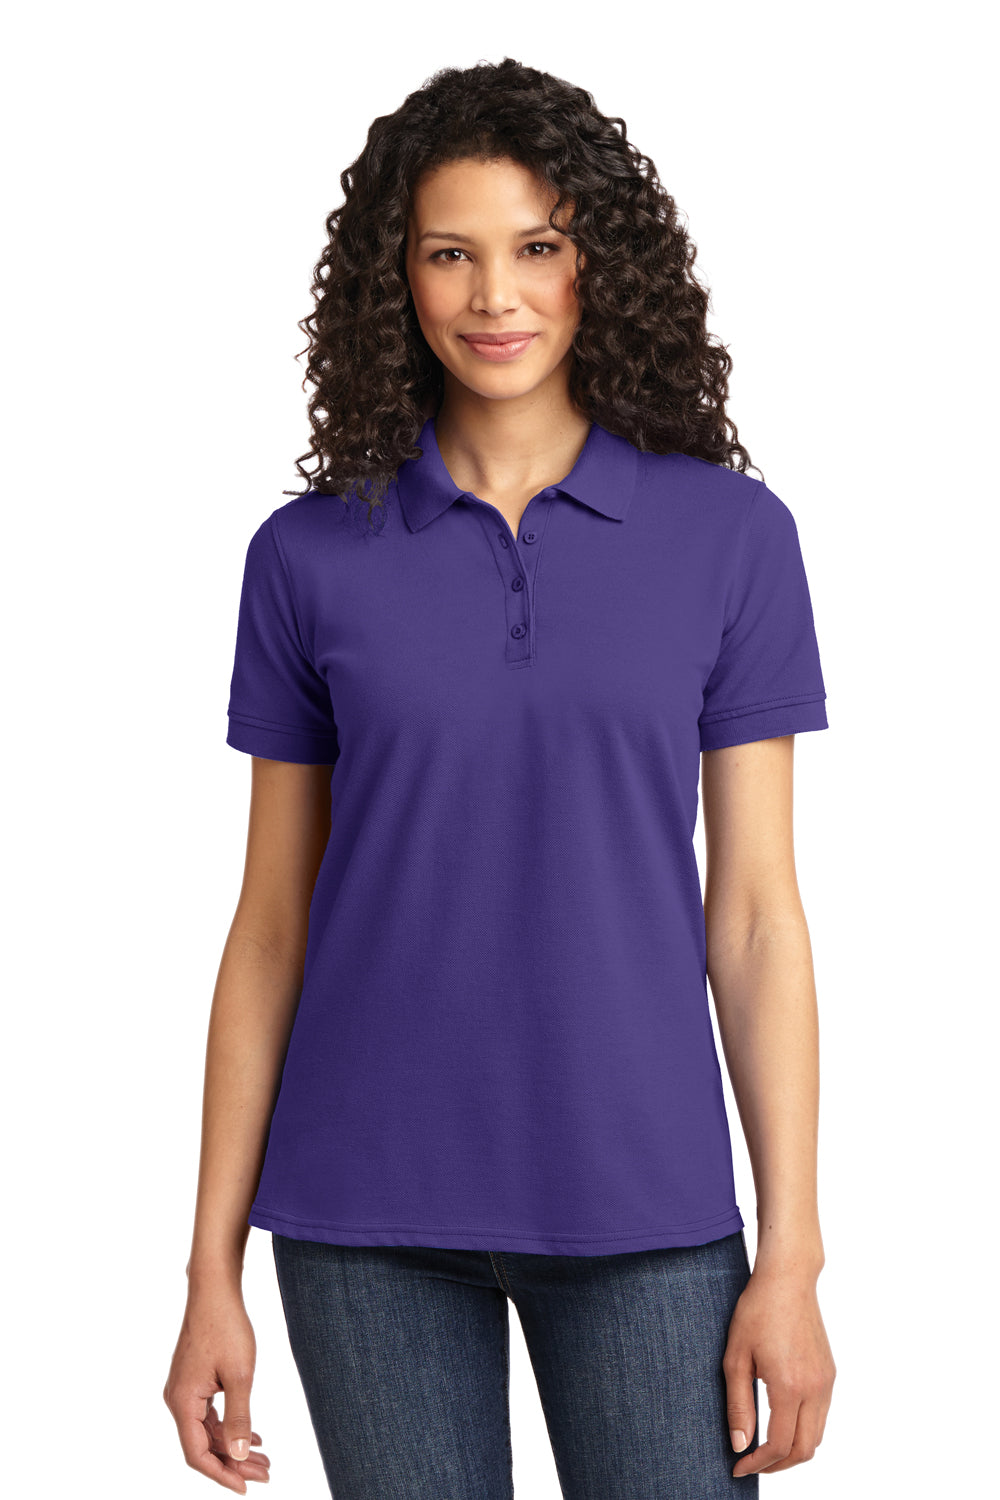 Port & Company LKP155 Womens Core Stain Resistant Short Sleeve Polo Shirt Purple Front